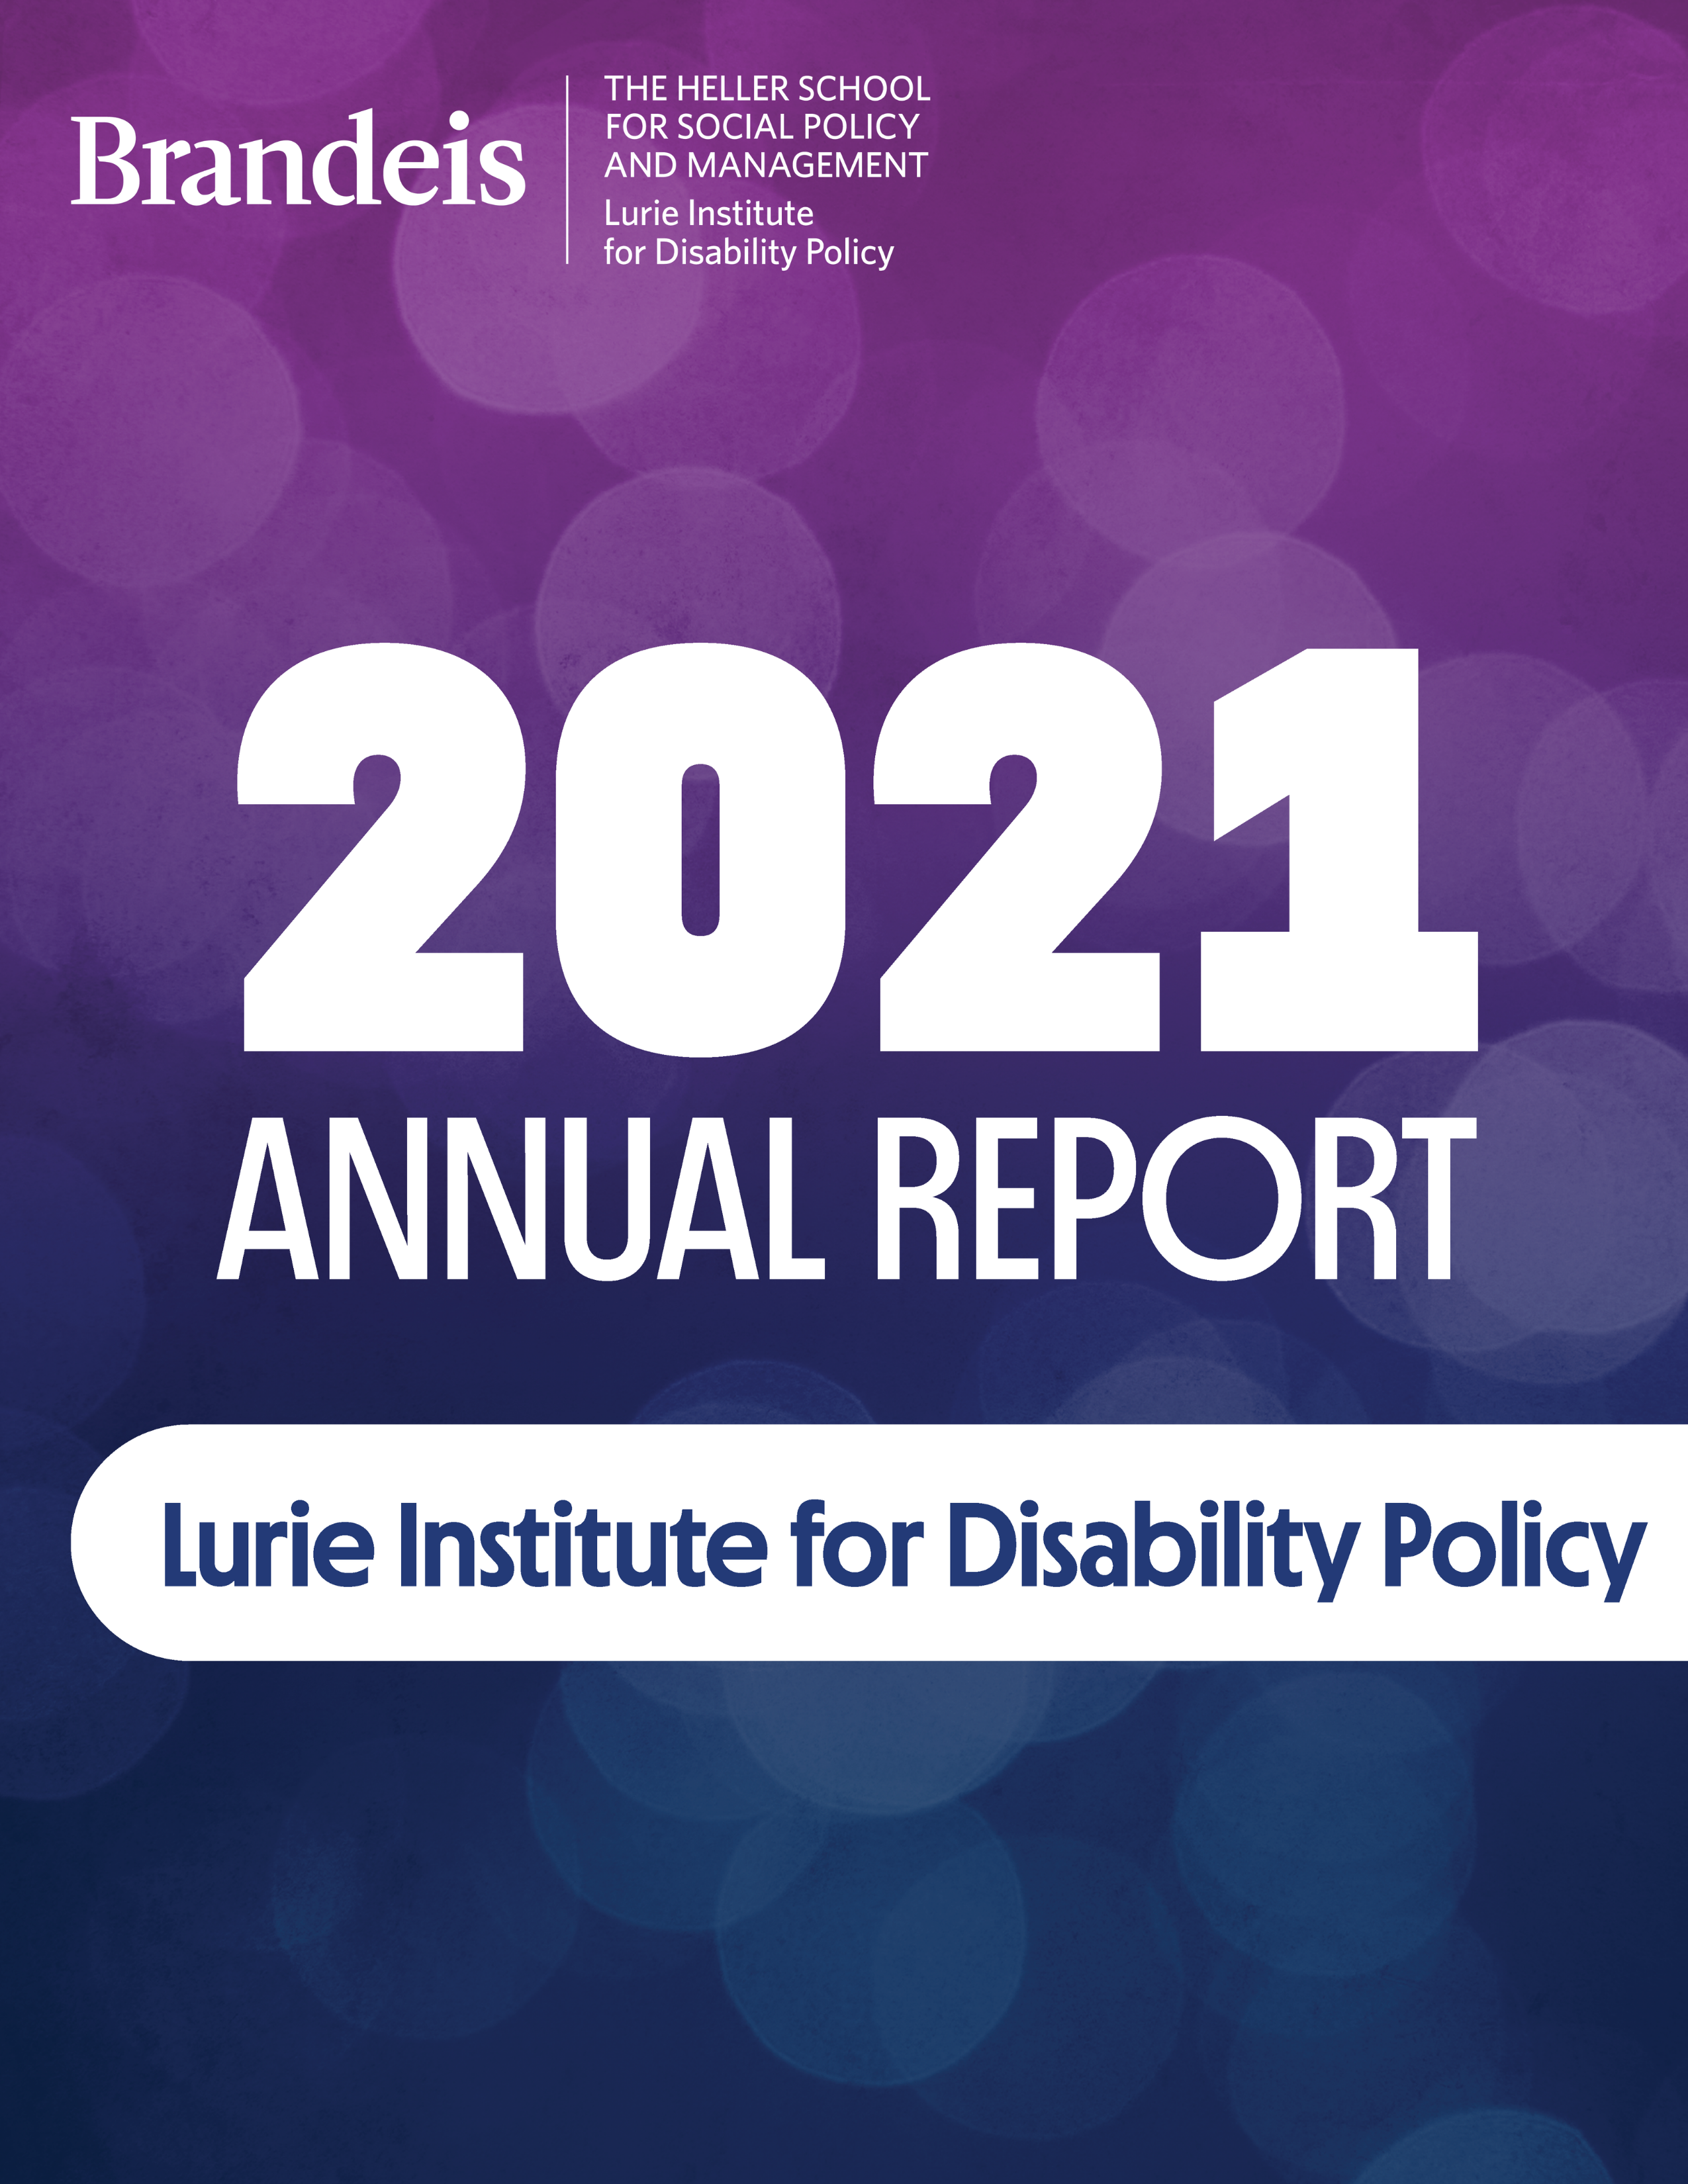 2021 Annual Report- Lurie Institute for Disability Policy